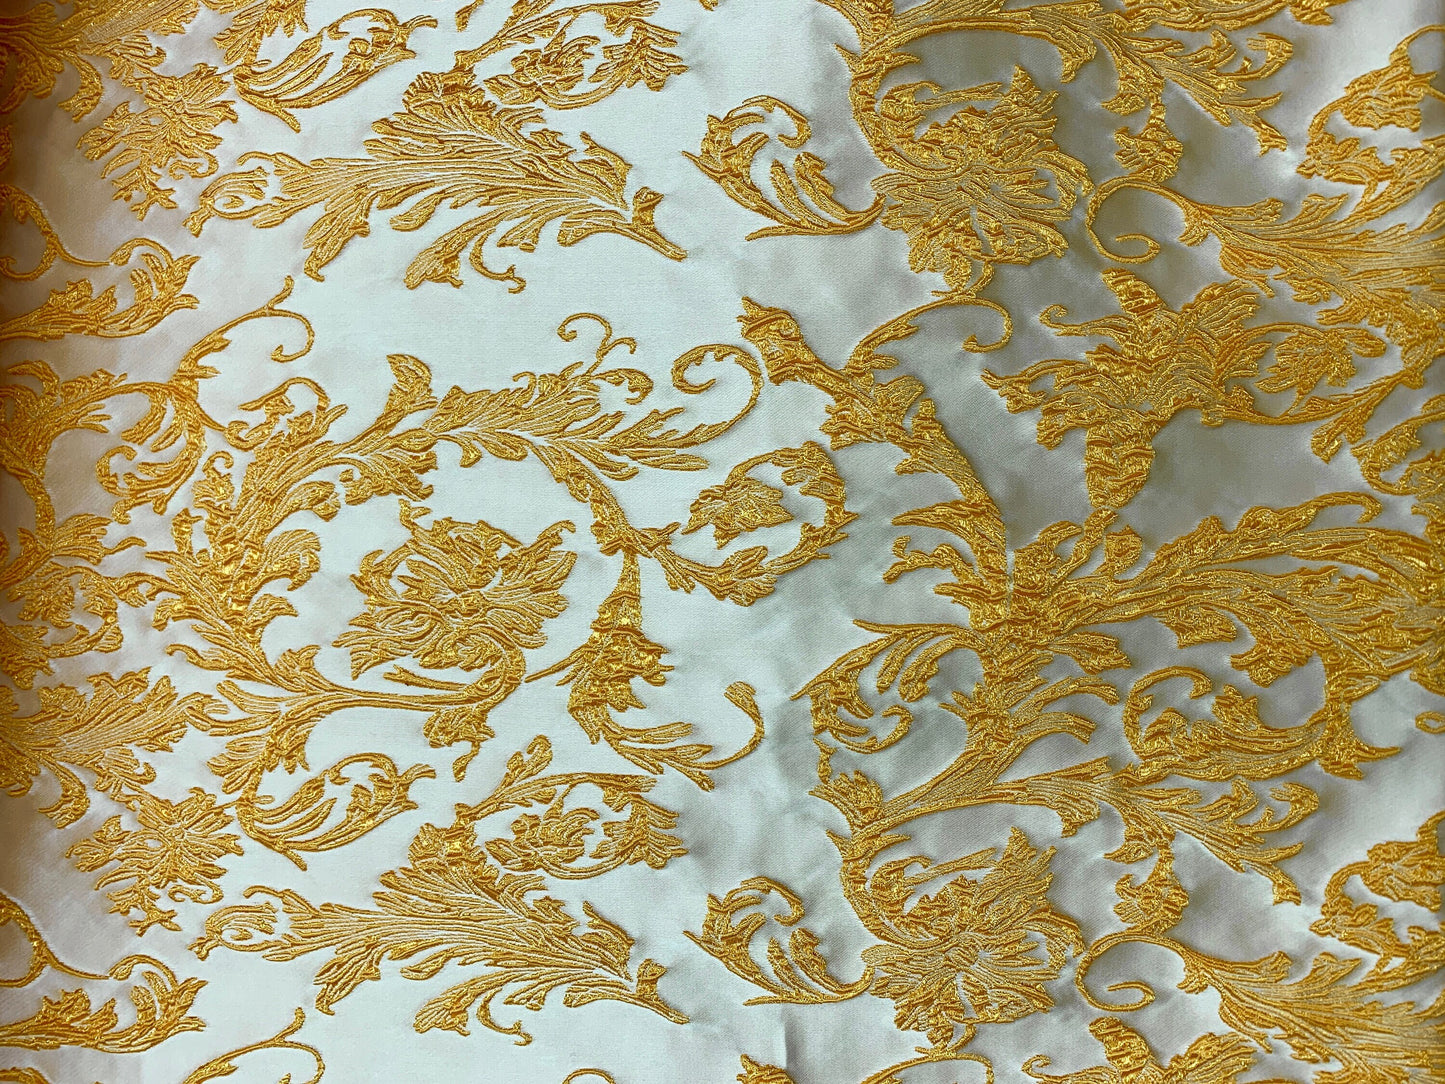 GOLDEN ORANGE Floral Brocade Fabric (60 in.) Sold By The Yard